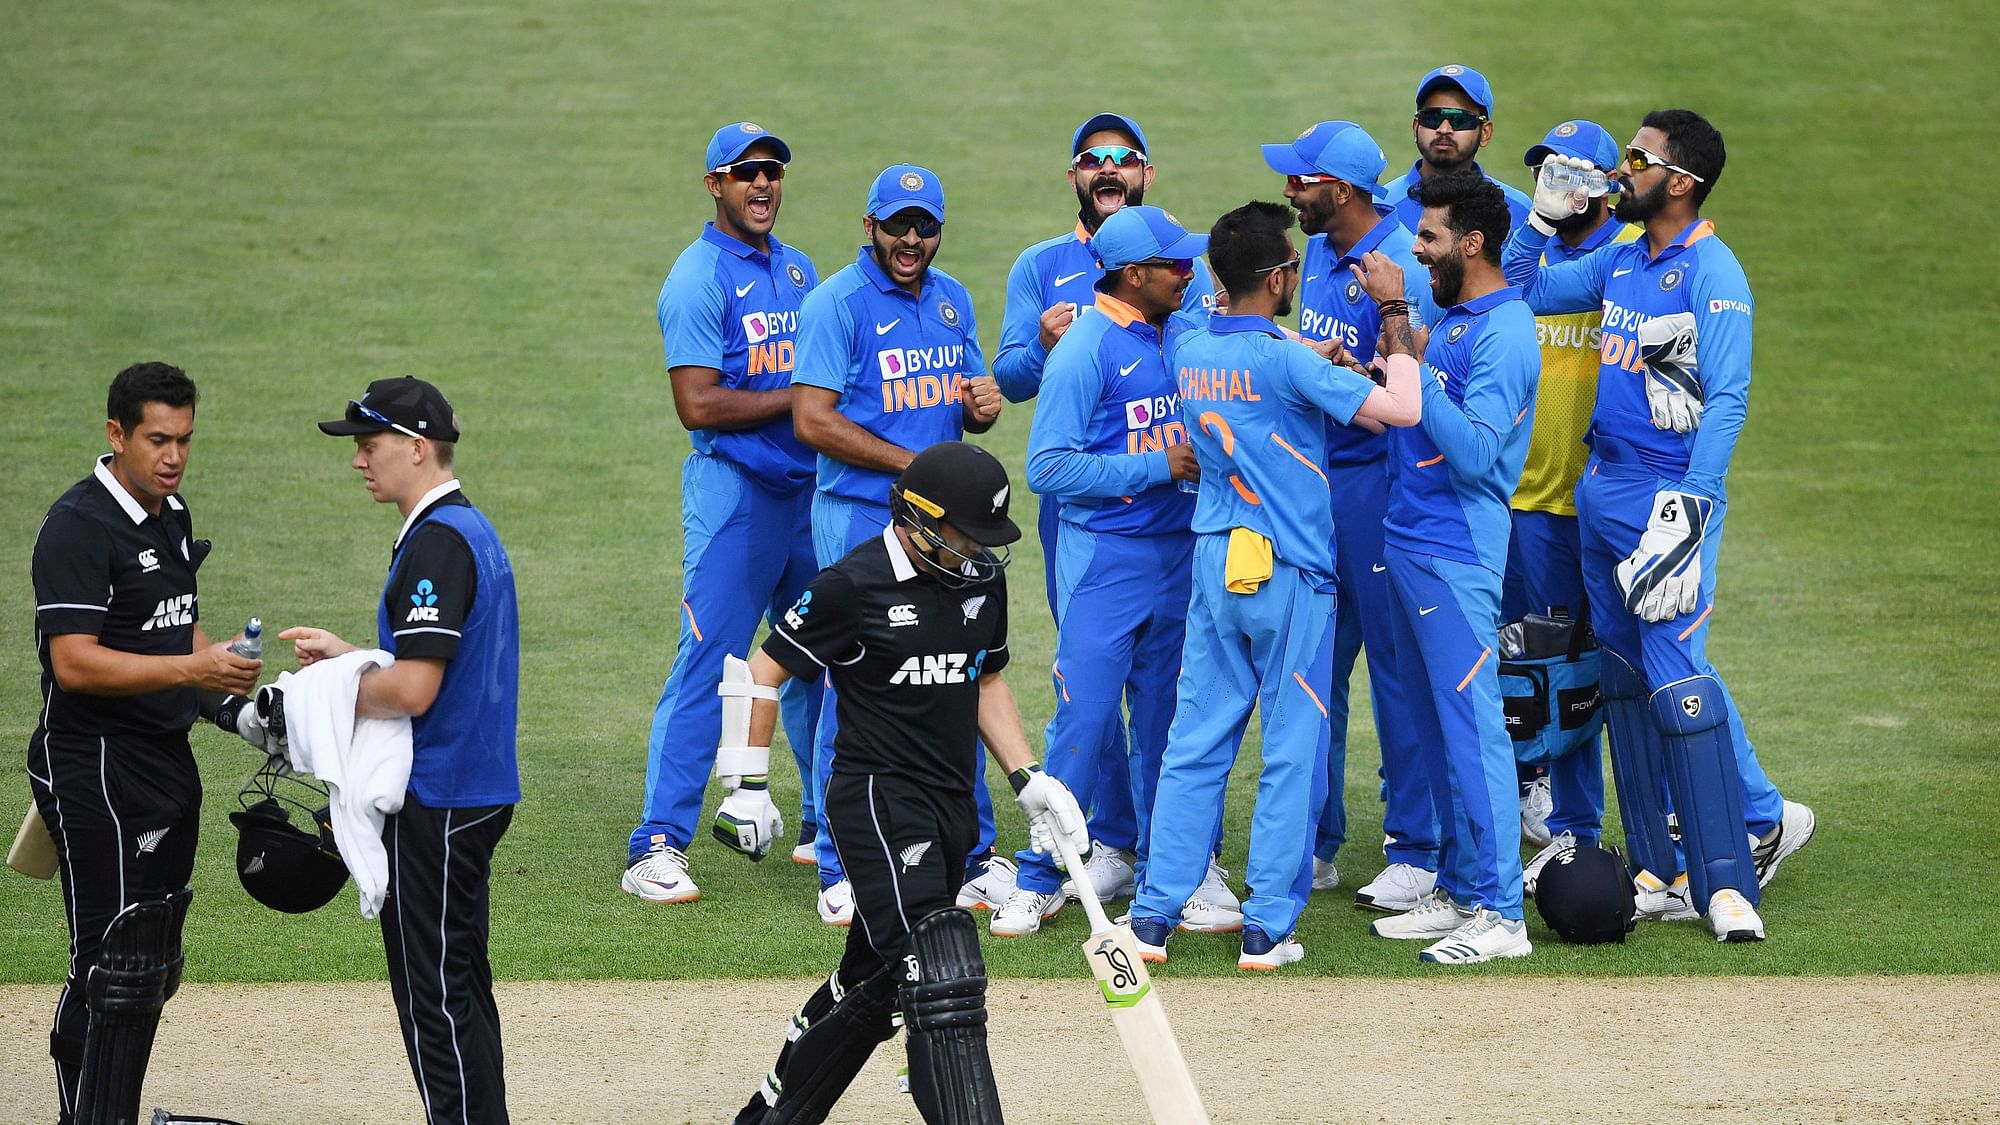 India registered two wins against New Zealand at this venue - by 90 runs on 26 January 2019 and by seven wickets on 28 January 2019.